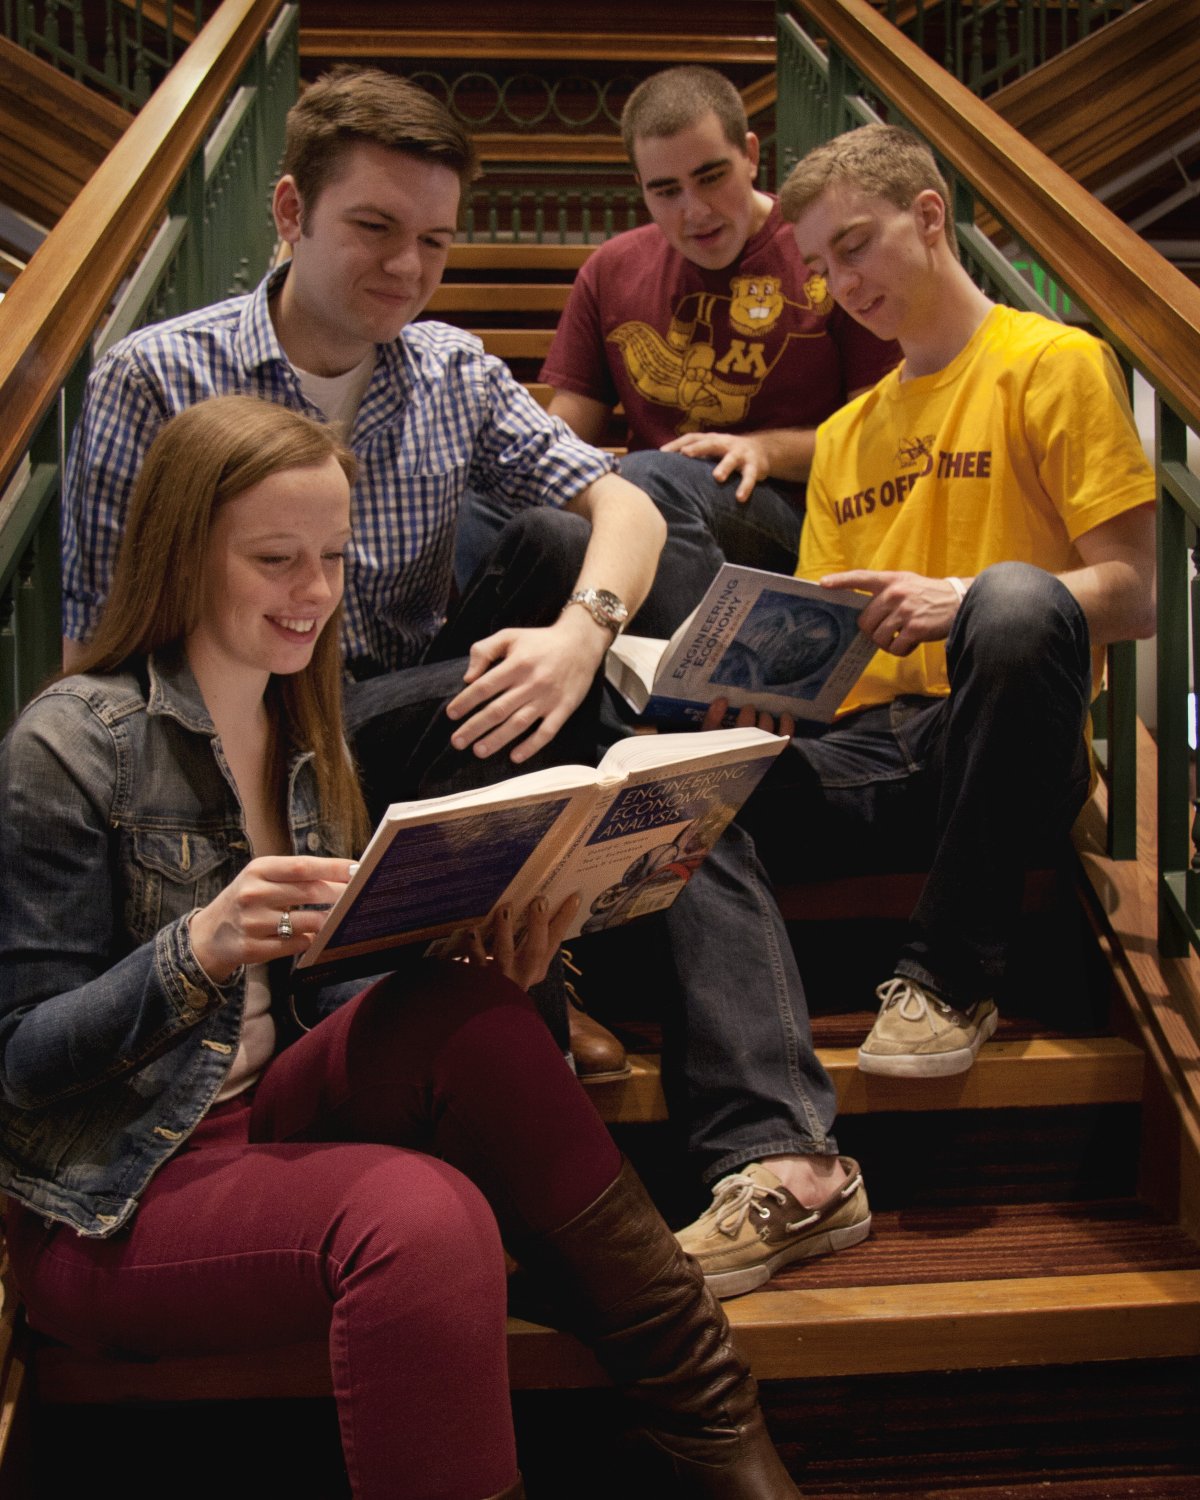 Students together on a staircase